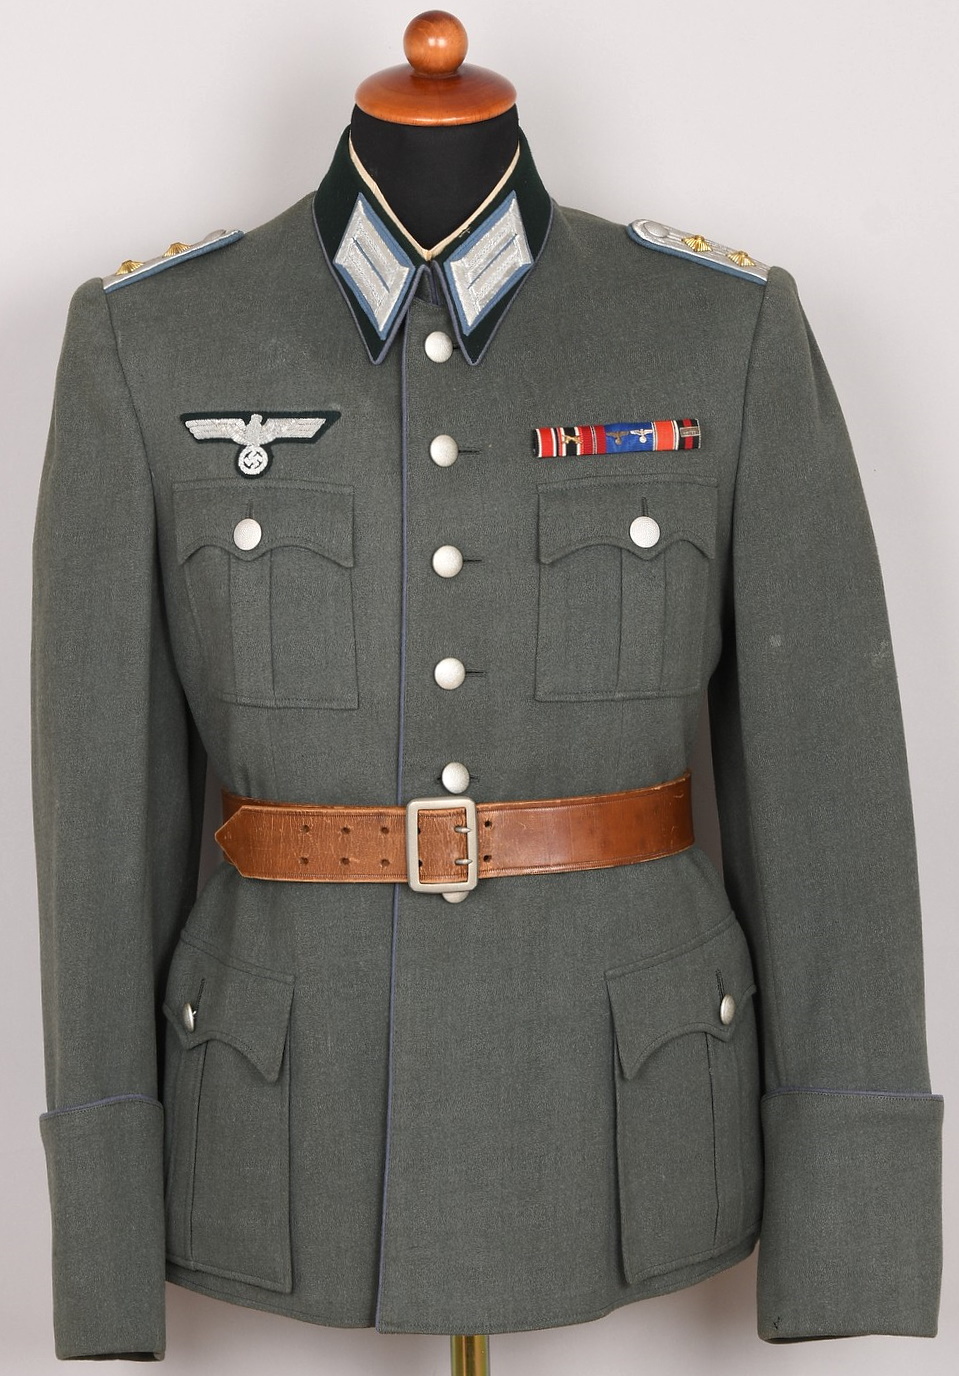 Heer Supply/Transport Hauptmanns Piped Service Tunic, namned.